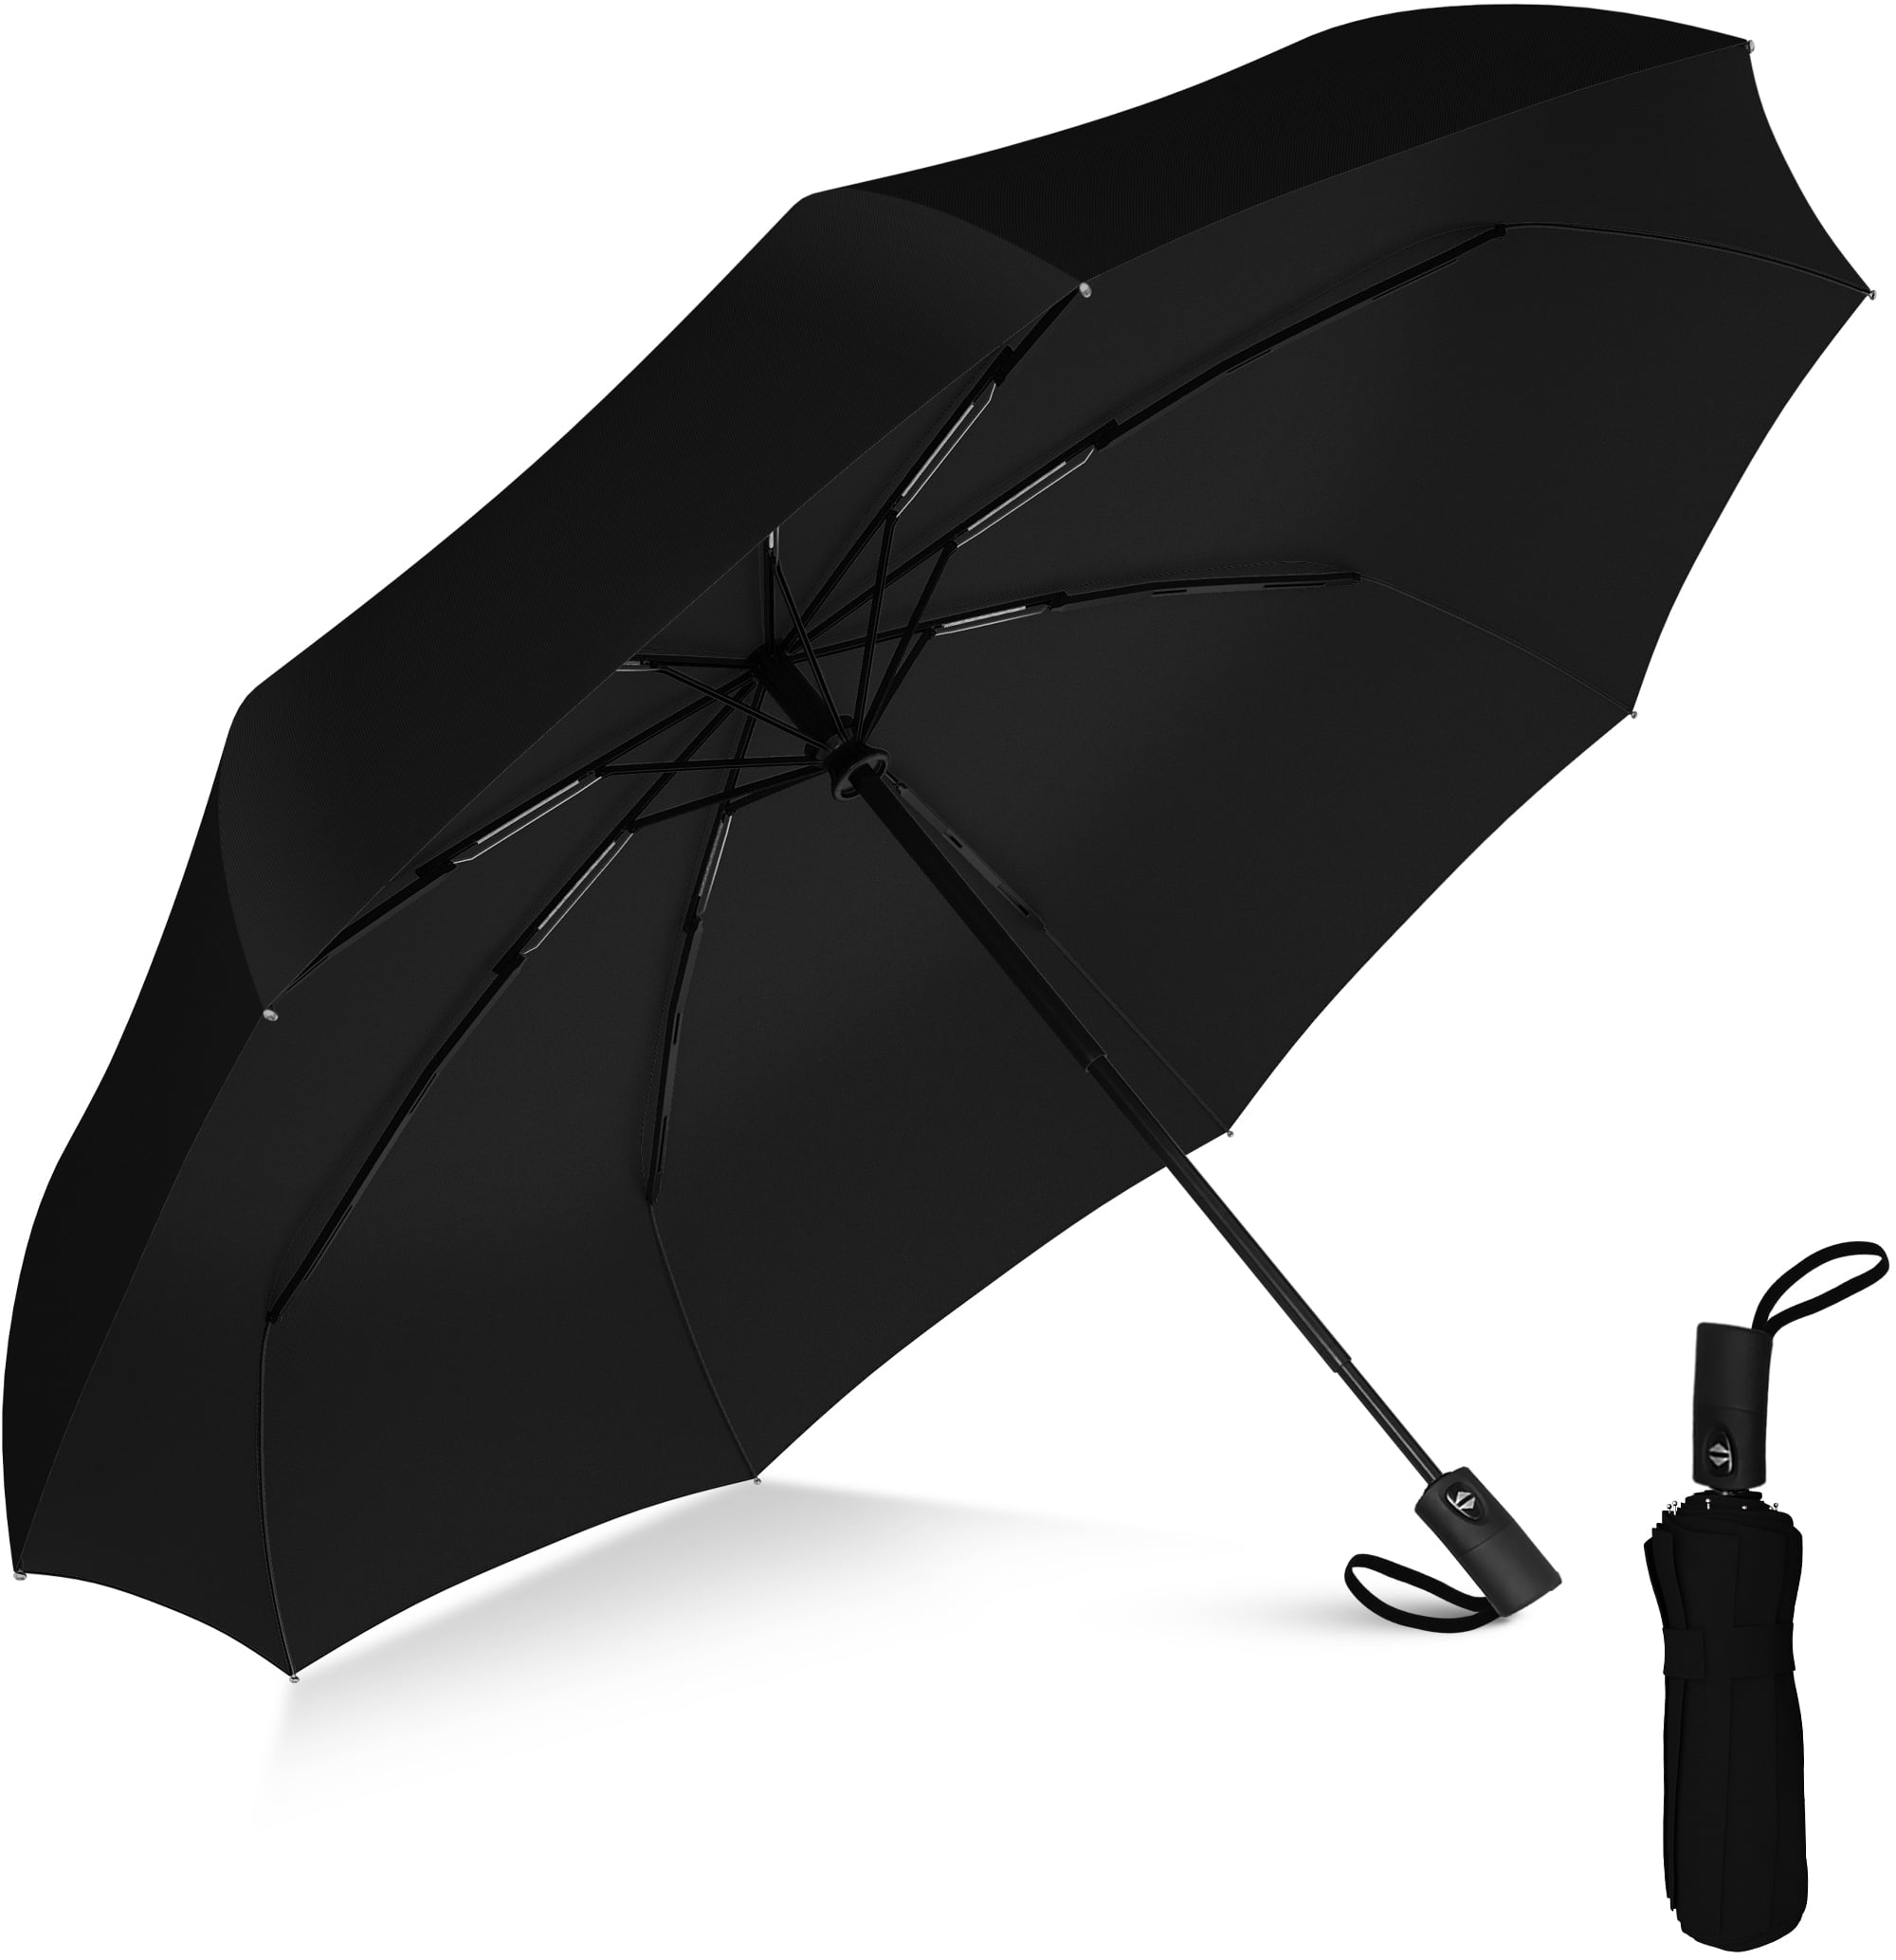 My Daily Afghan Hound Dog Travel Umbrella Auto Open/Close Lightweight Compact Windproof